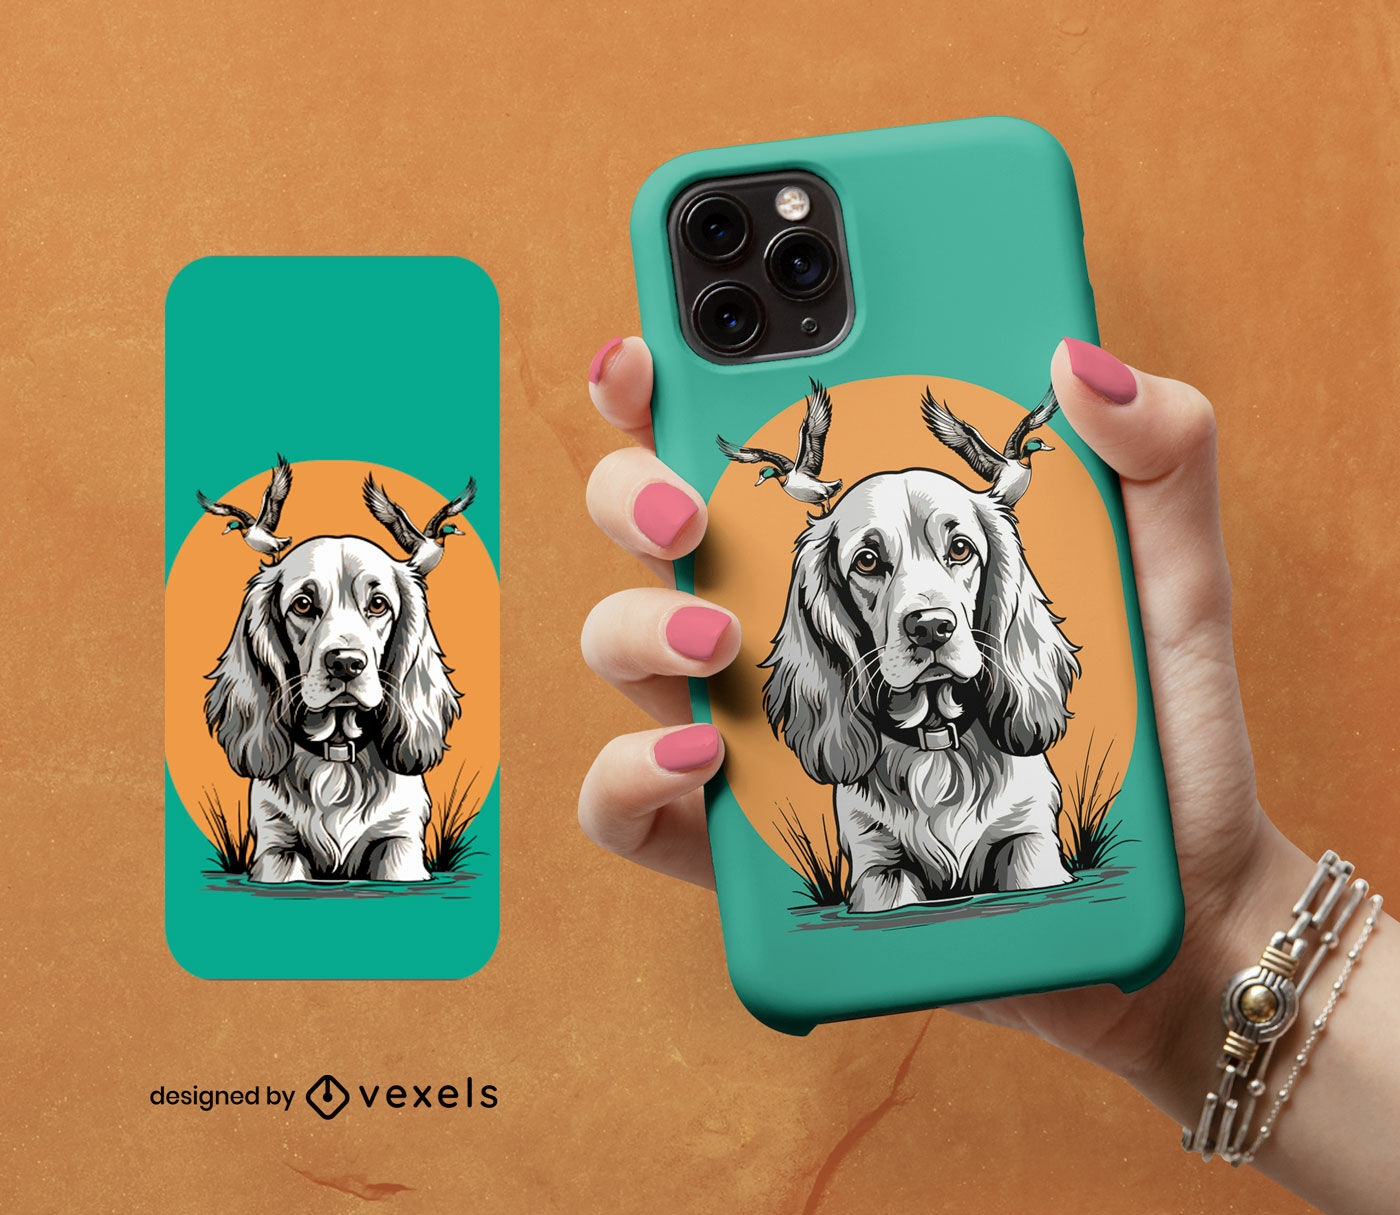 Dog with antlers phone case design